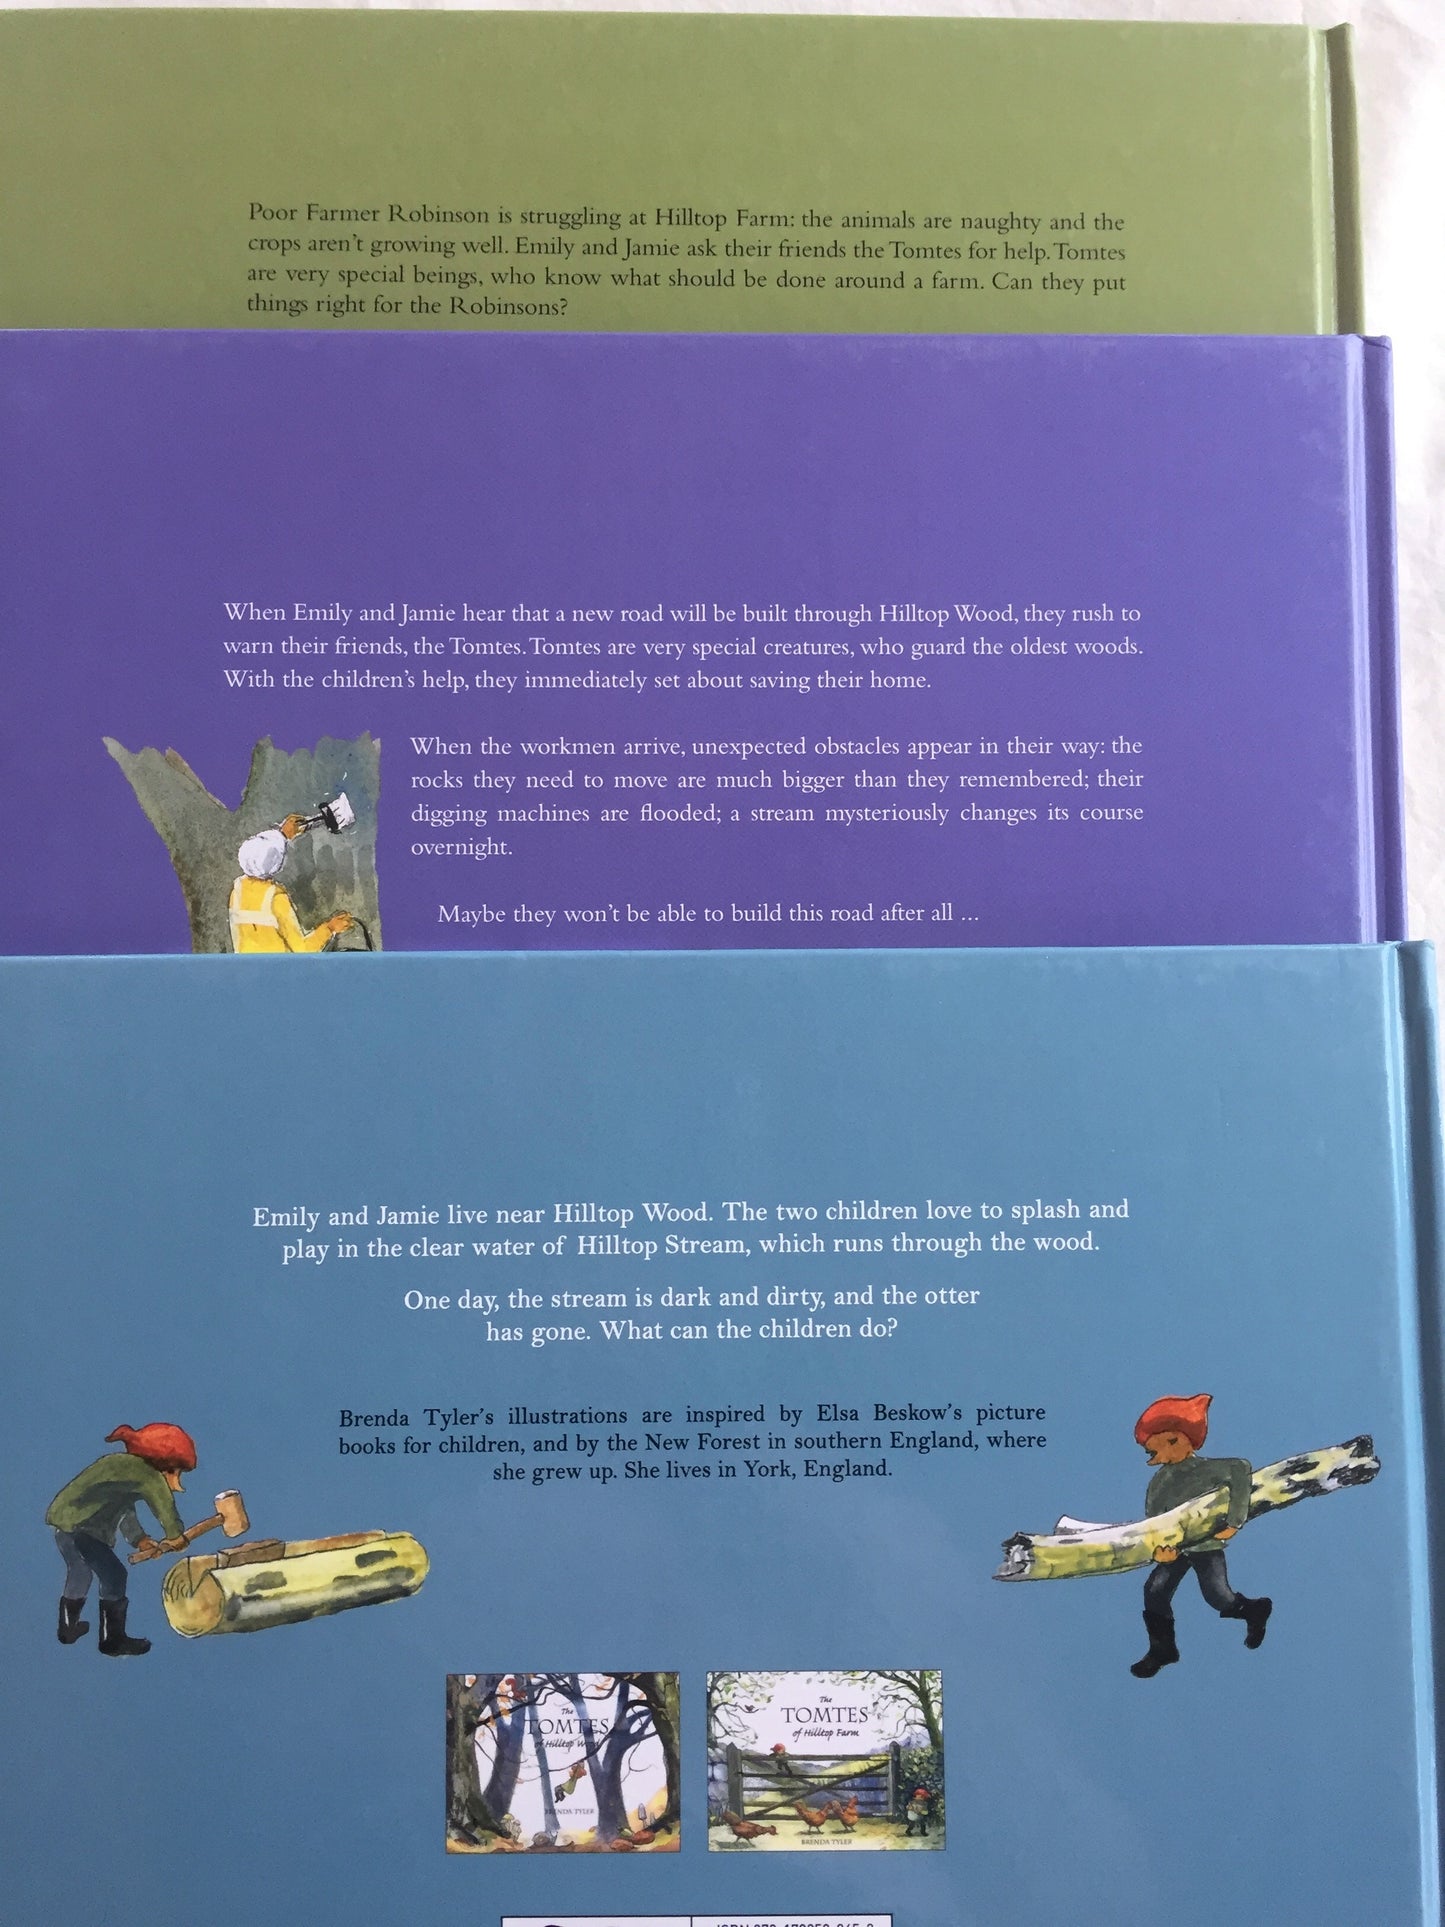 Children's Picture Book - The TOMTES OF HILLTOP WOOD Series (3 Titles)